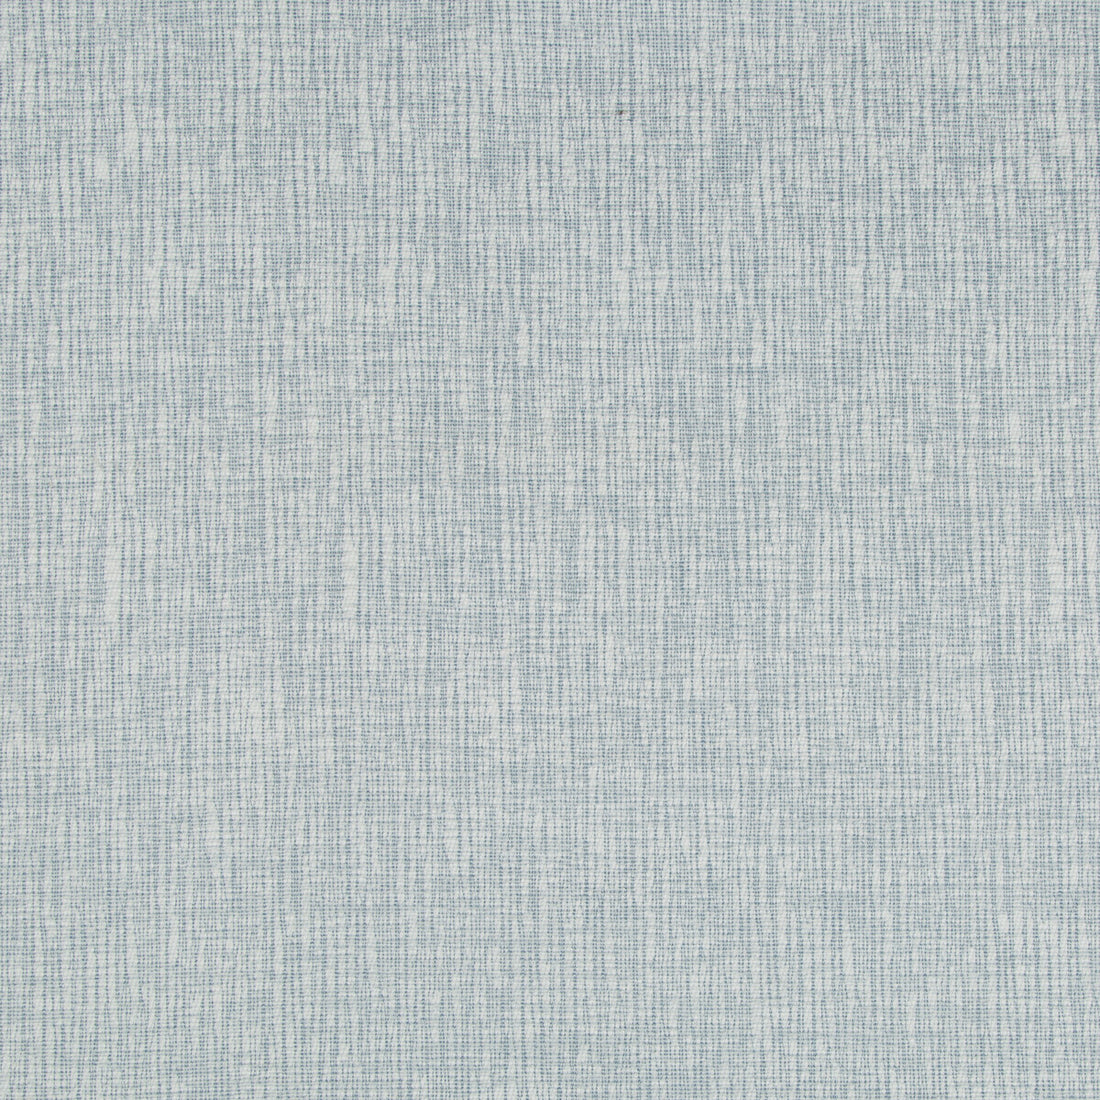 Mysto fabric in pacific color - pattern 35003.15.0 - by Kravet Basics in the Jeffrey Alan Marks Oceanview collection